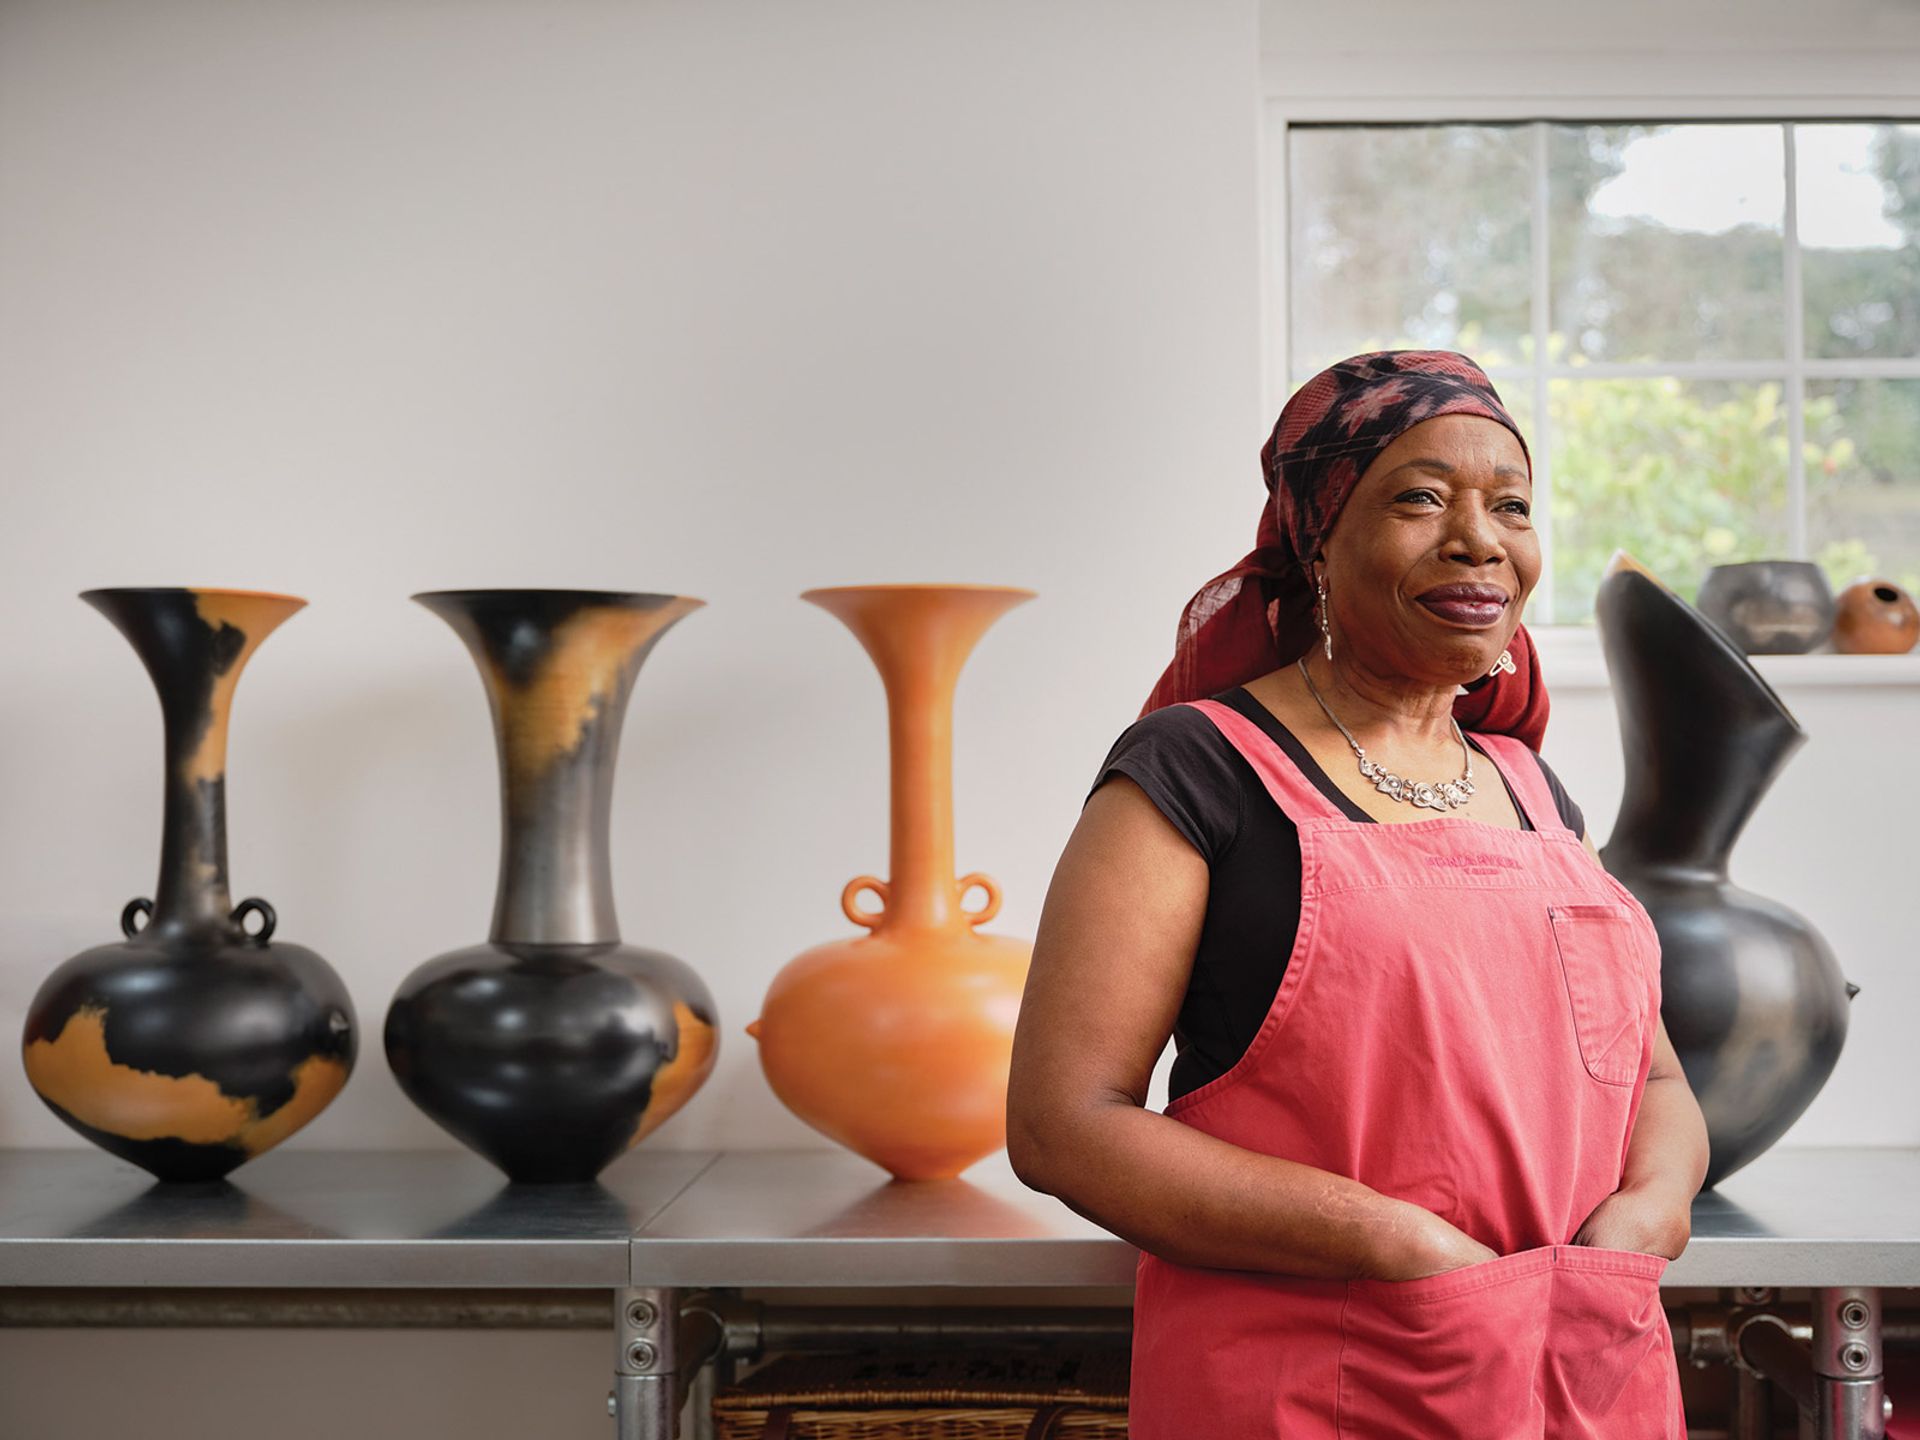 Magdalene Odundo is currently showing her vessels at the Fitzwilliam Museum in Cambridge. She is also included in the upcoming exhibition Body Vessel Clay: Black Women, Ceramics & Contemporary Art at London’s Two Temple Place © Cristian Barnett